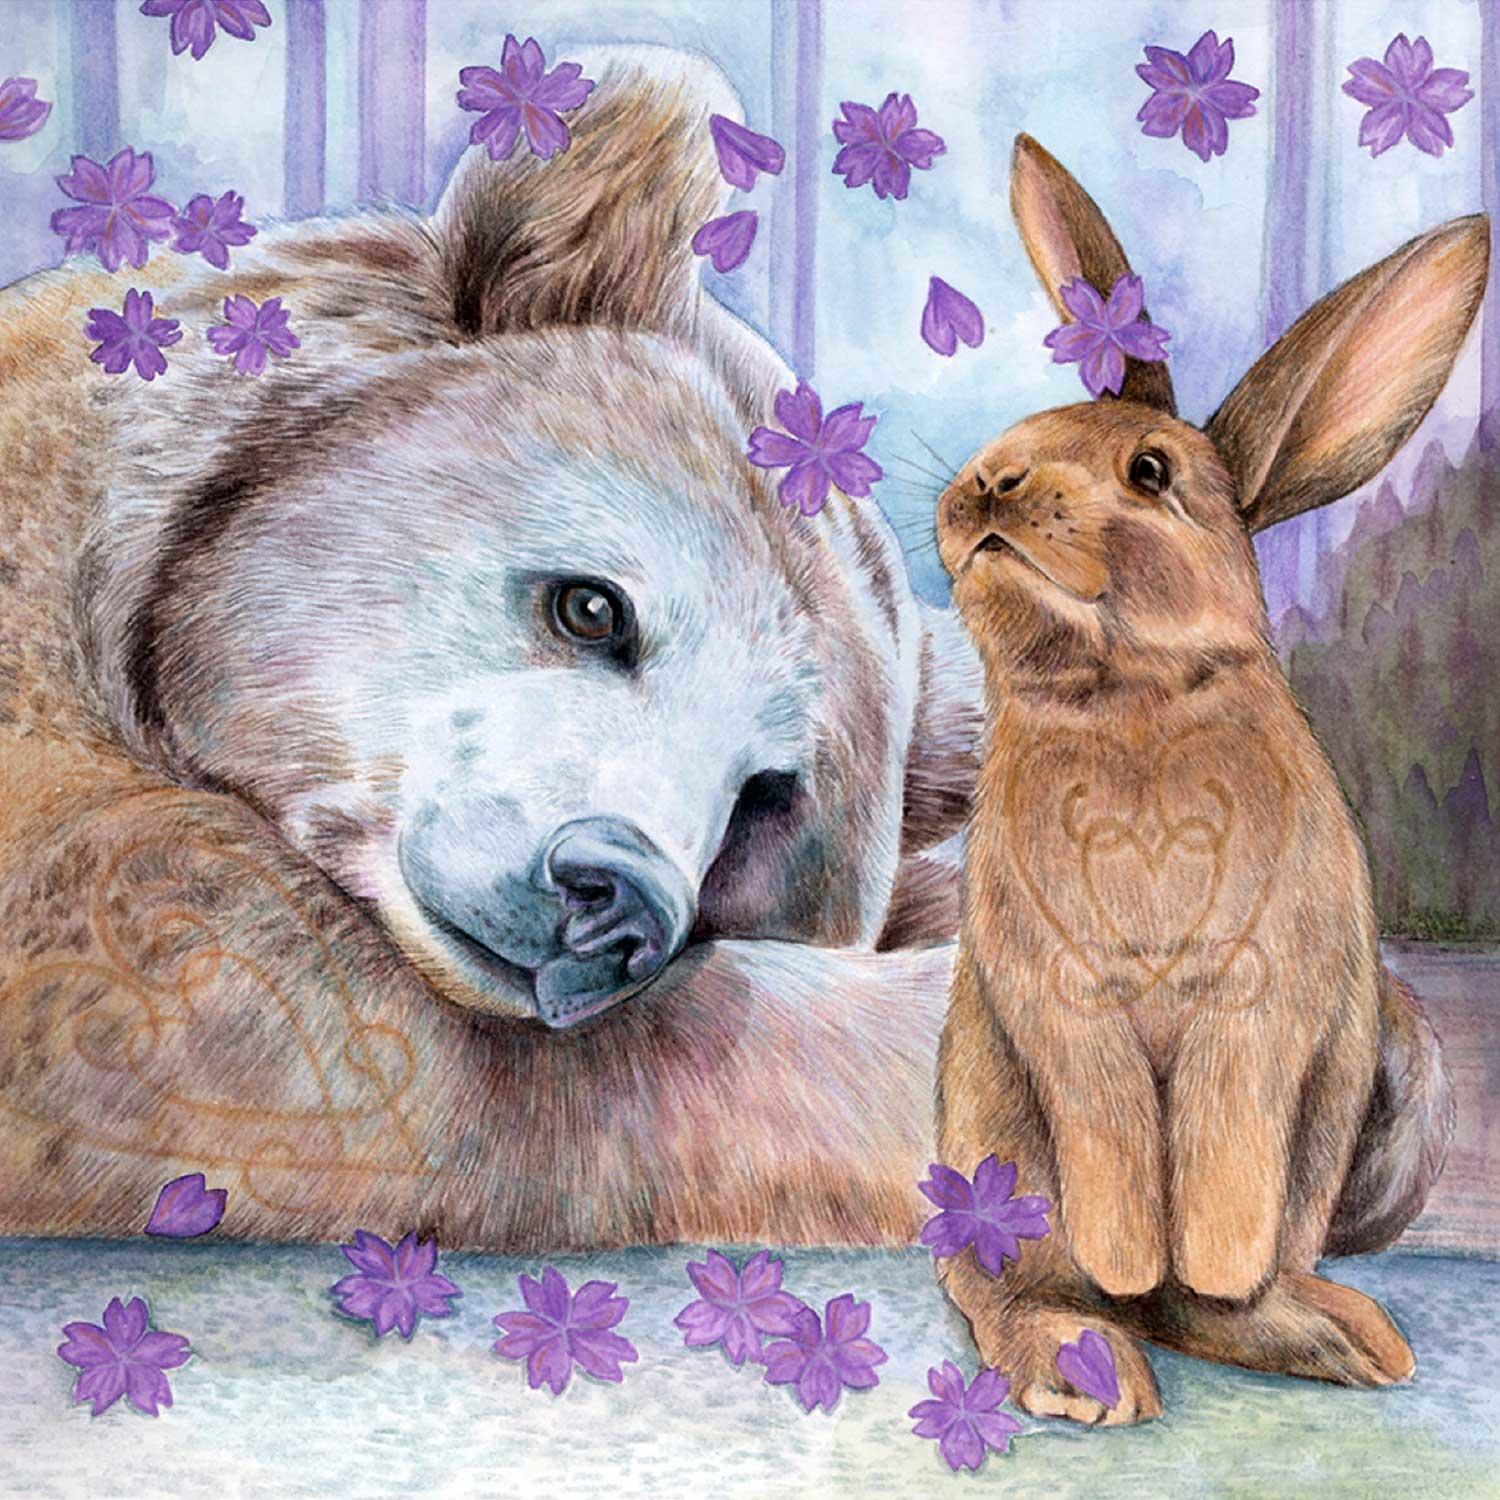 Bear and Bunny by artist Marjory Tait